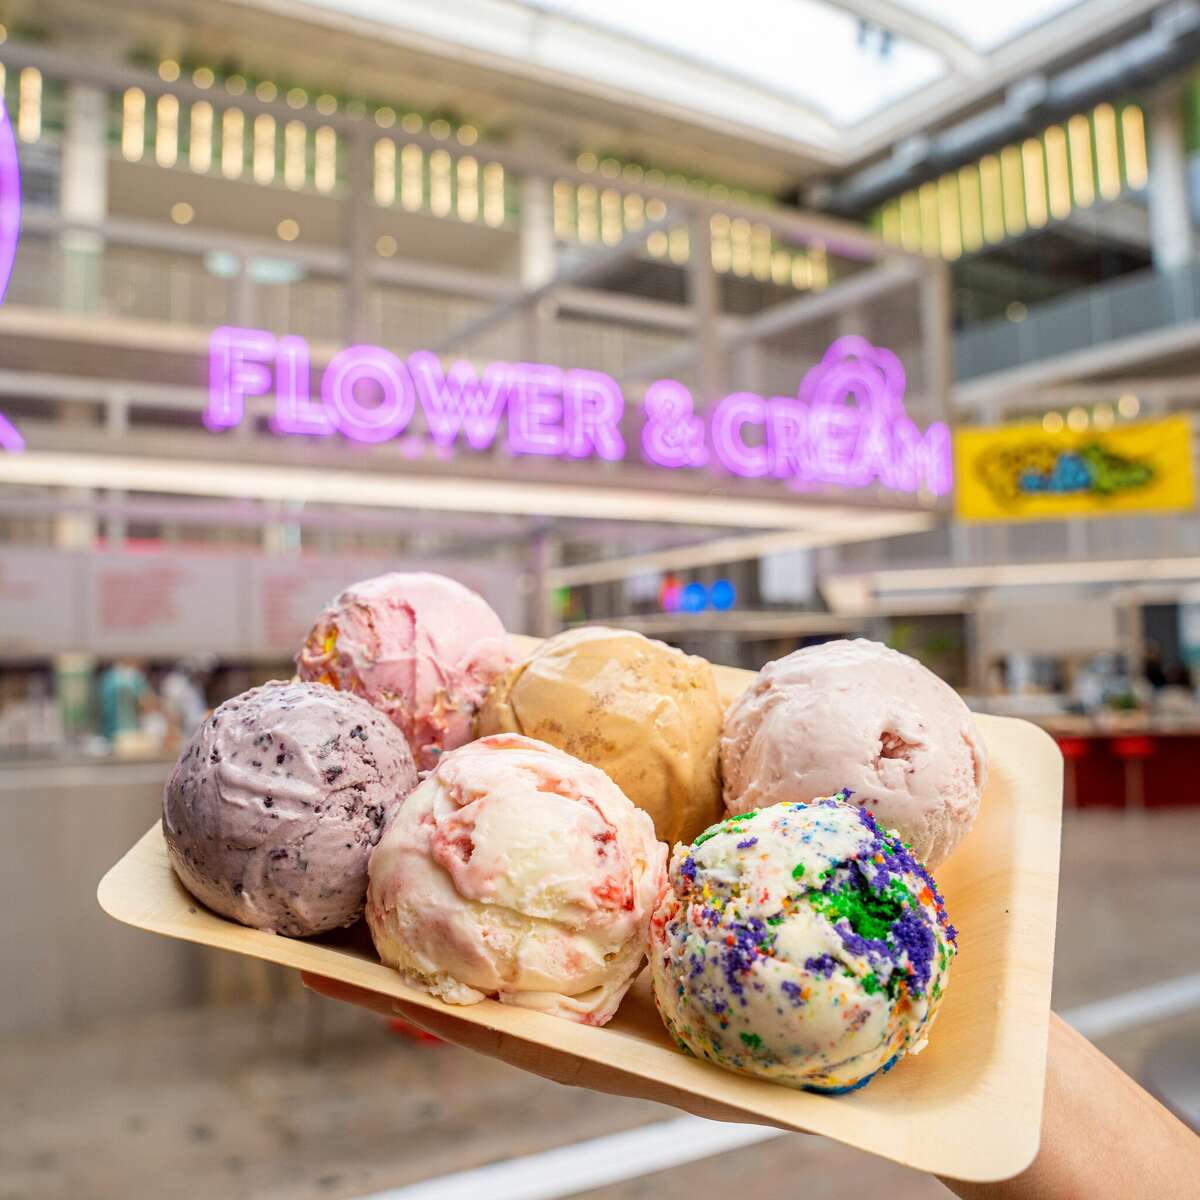 Six scoops of ice cream from Houston's Flower & Cream are shown on a tray.